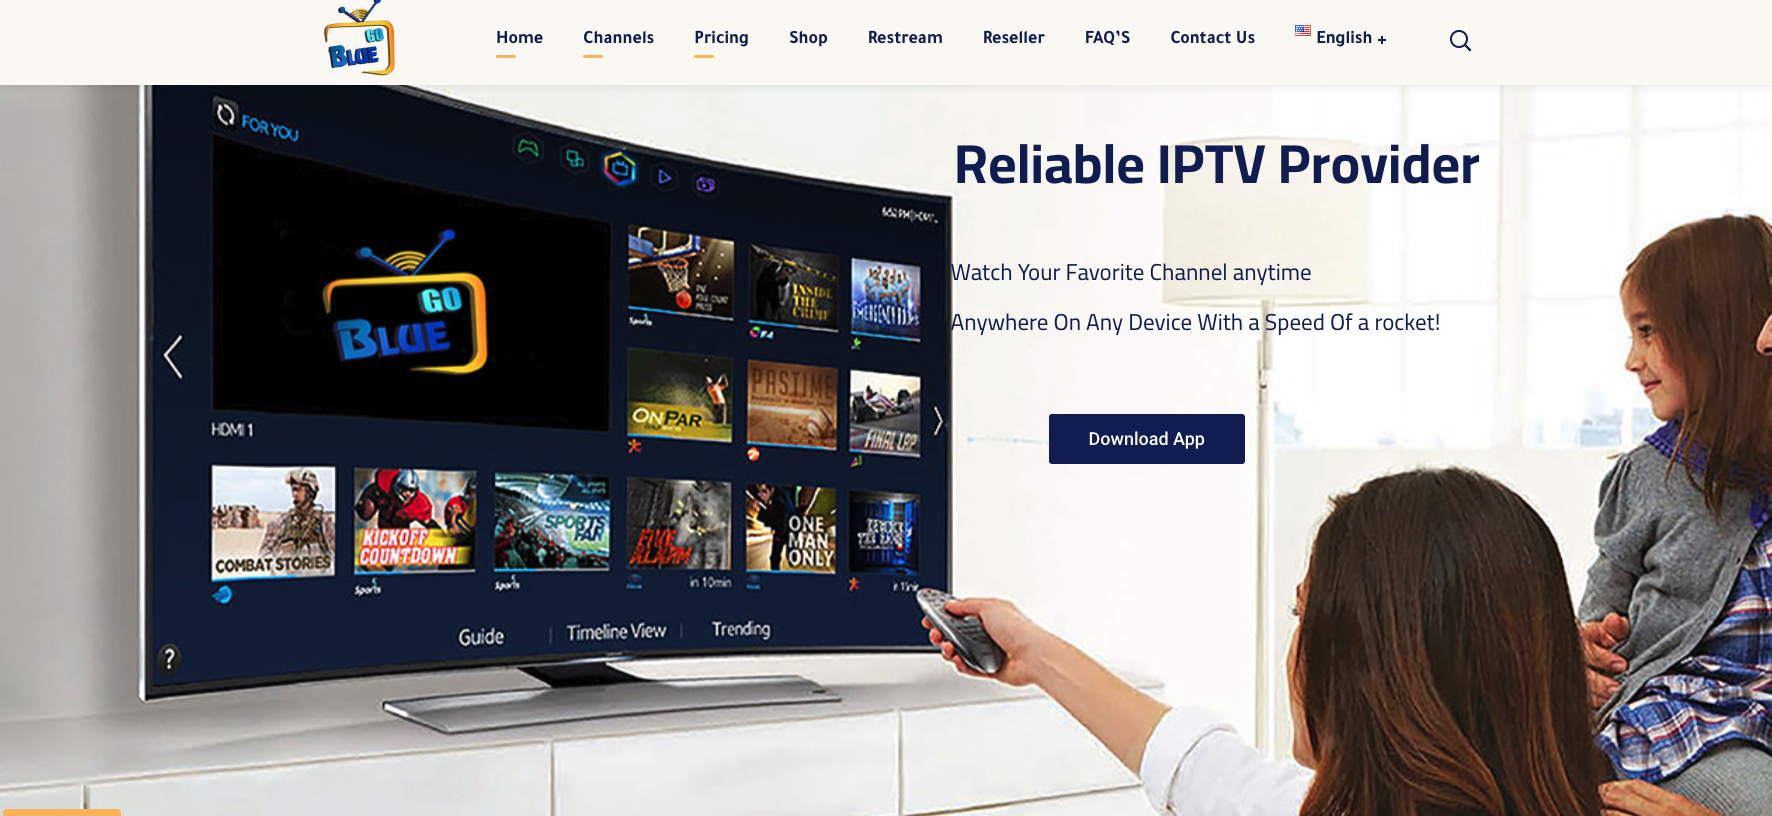 How to Install Blue TV IPTV Service